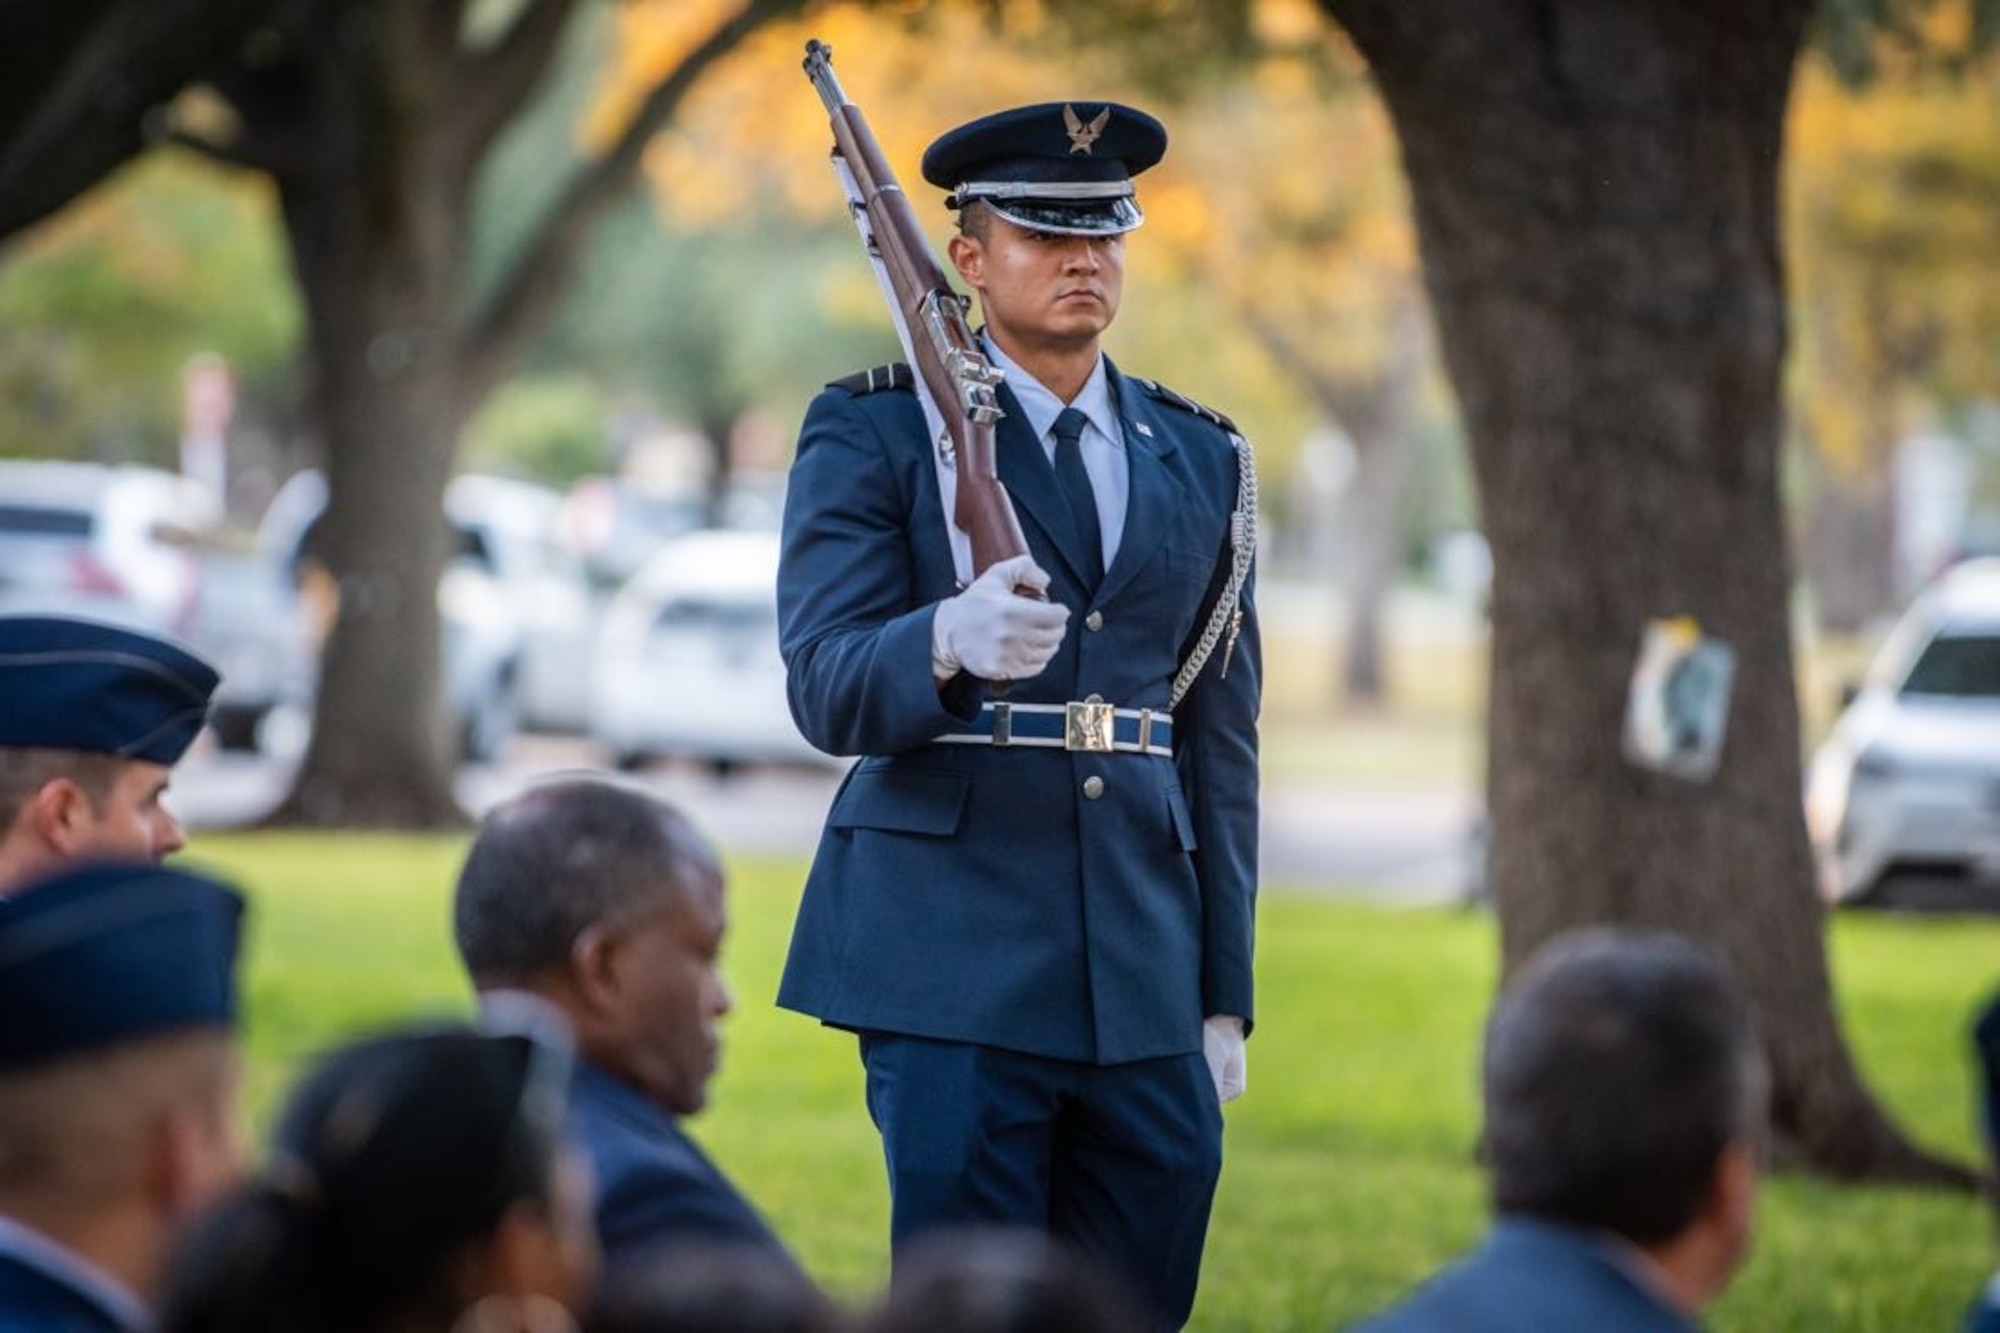 Juan Carlos Jara, Angelo State University Air Force ROTC cadet, participates in a drill ceremony at San Angelo, Texas. Jara is a Columbia native, who arrived in the United States in 2012 at 16. (Courtesy photo)